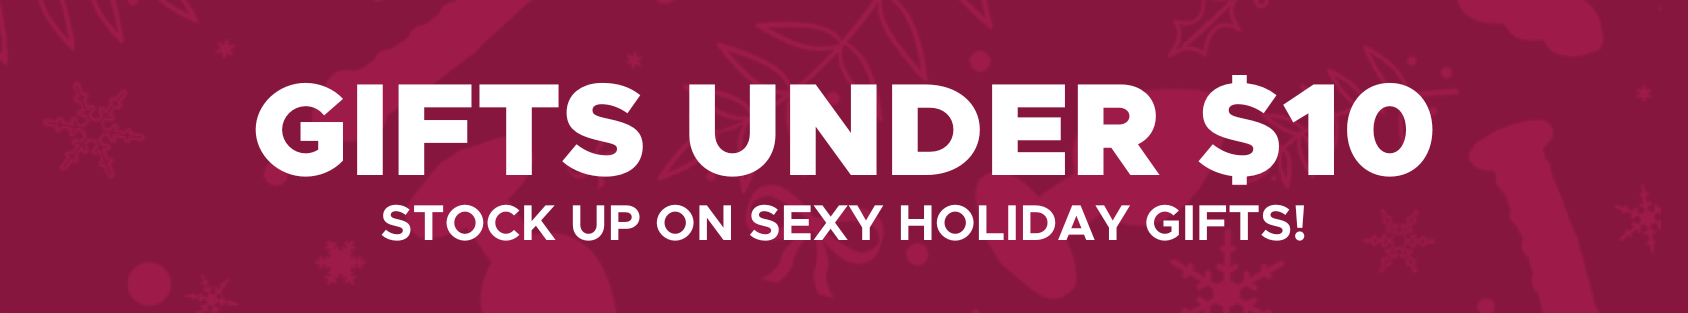 Shop our selection of sexy holiday gifts under $10 and stock up for Christmas!